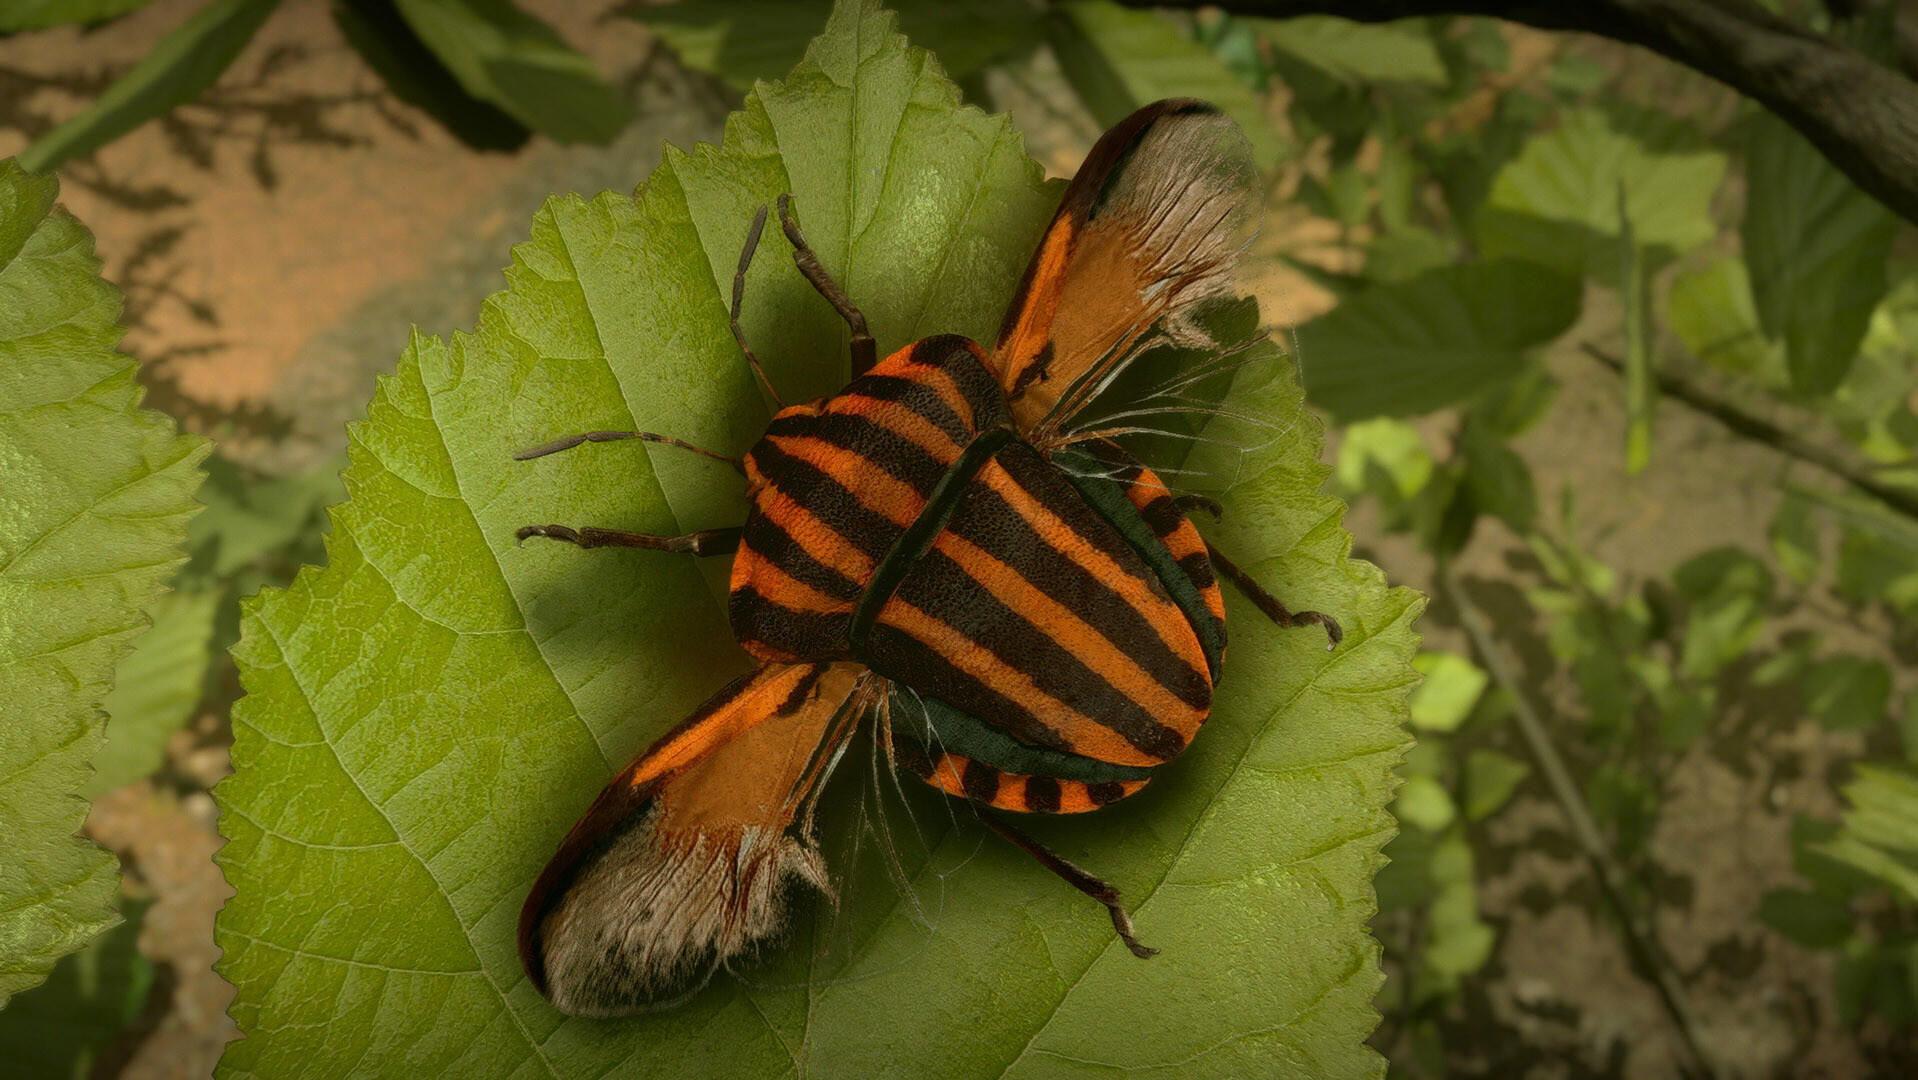 Insect Worlds screenshot game